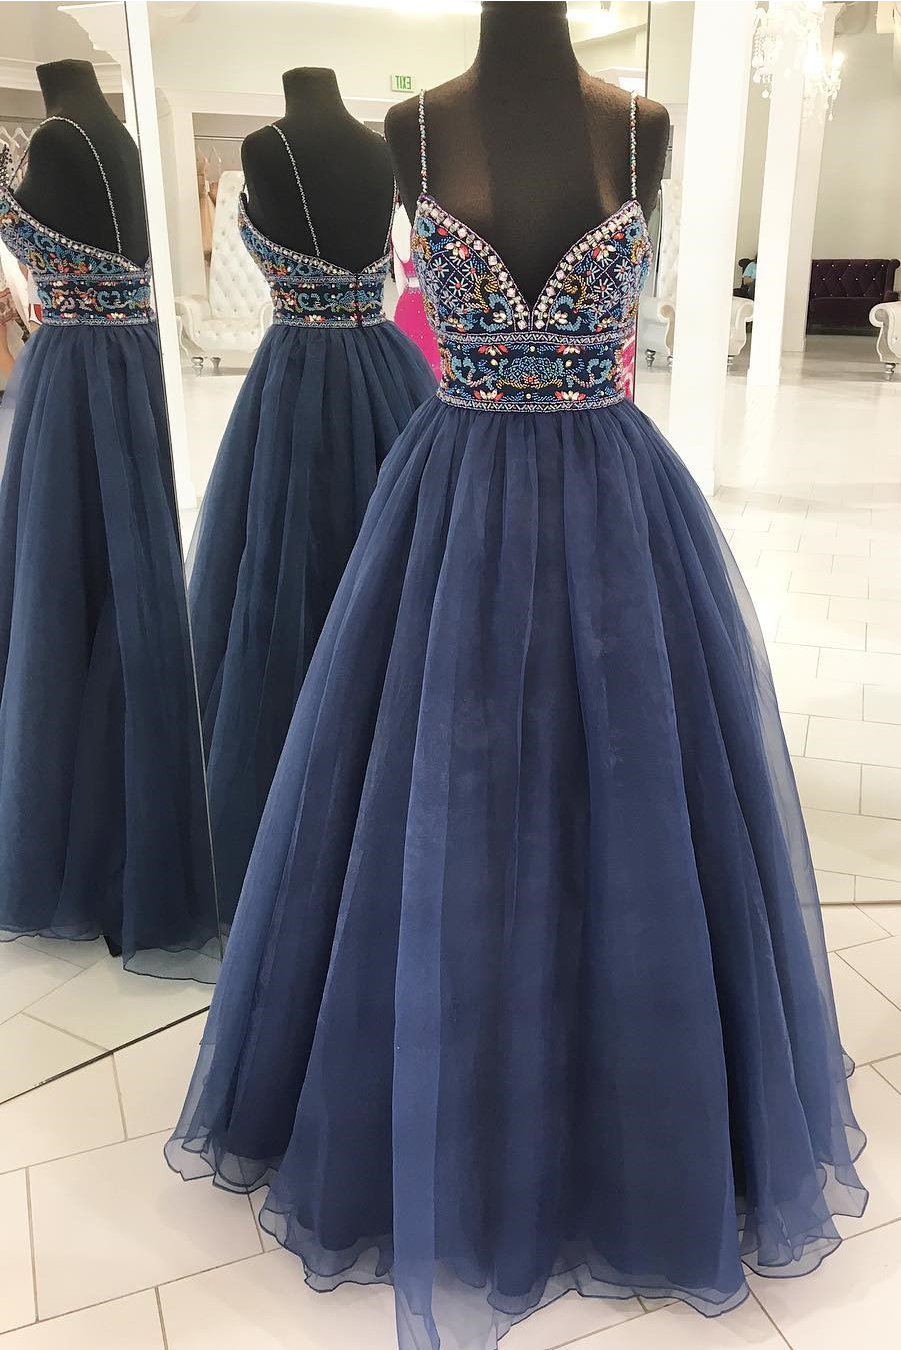 Prom Dress With Colored Beading, Graduation Party Dresses, Prom Dresses For Teens,p4162